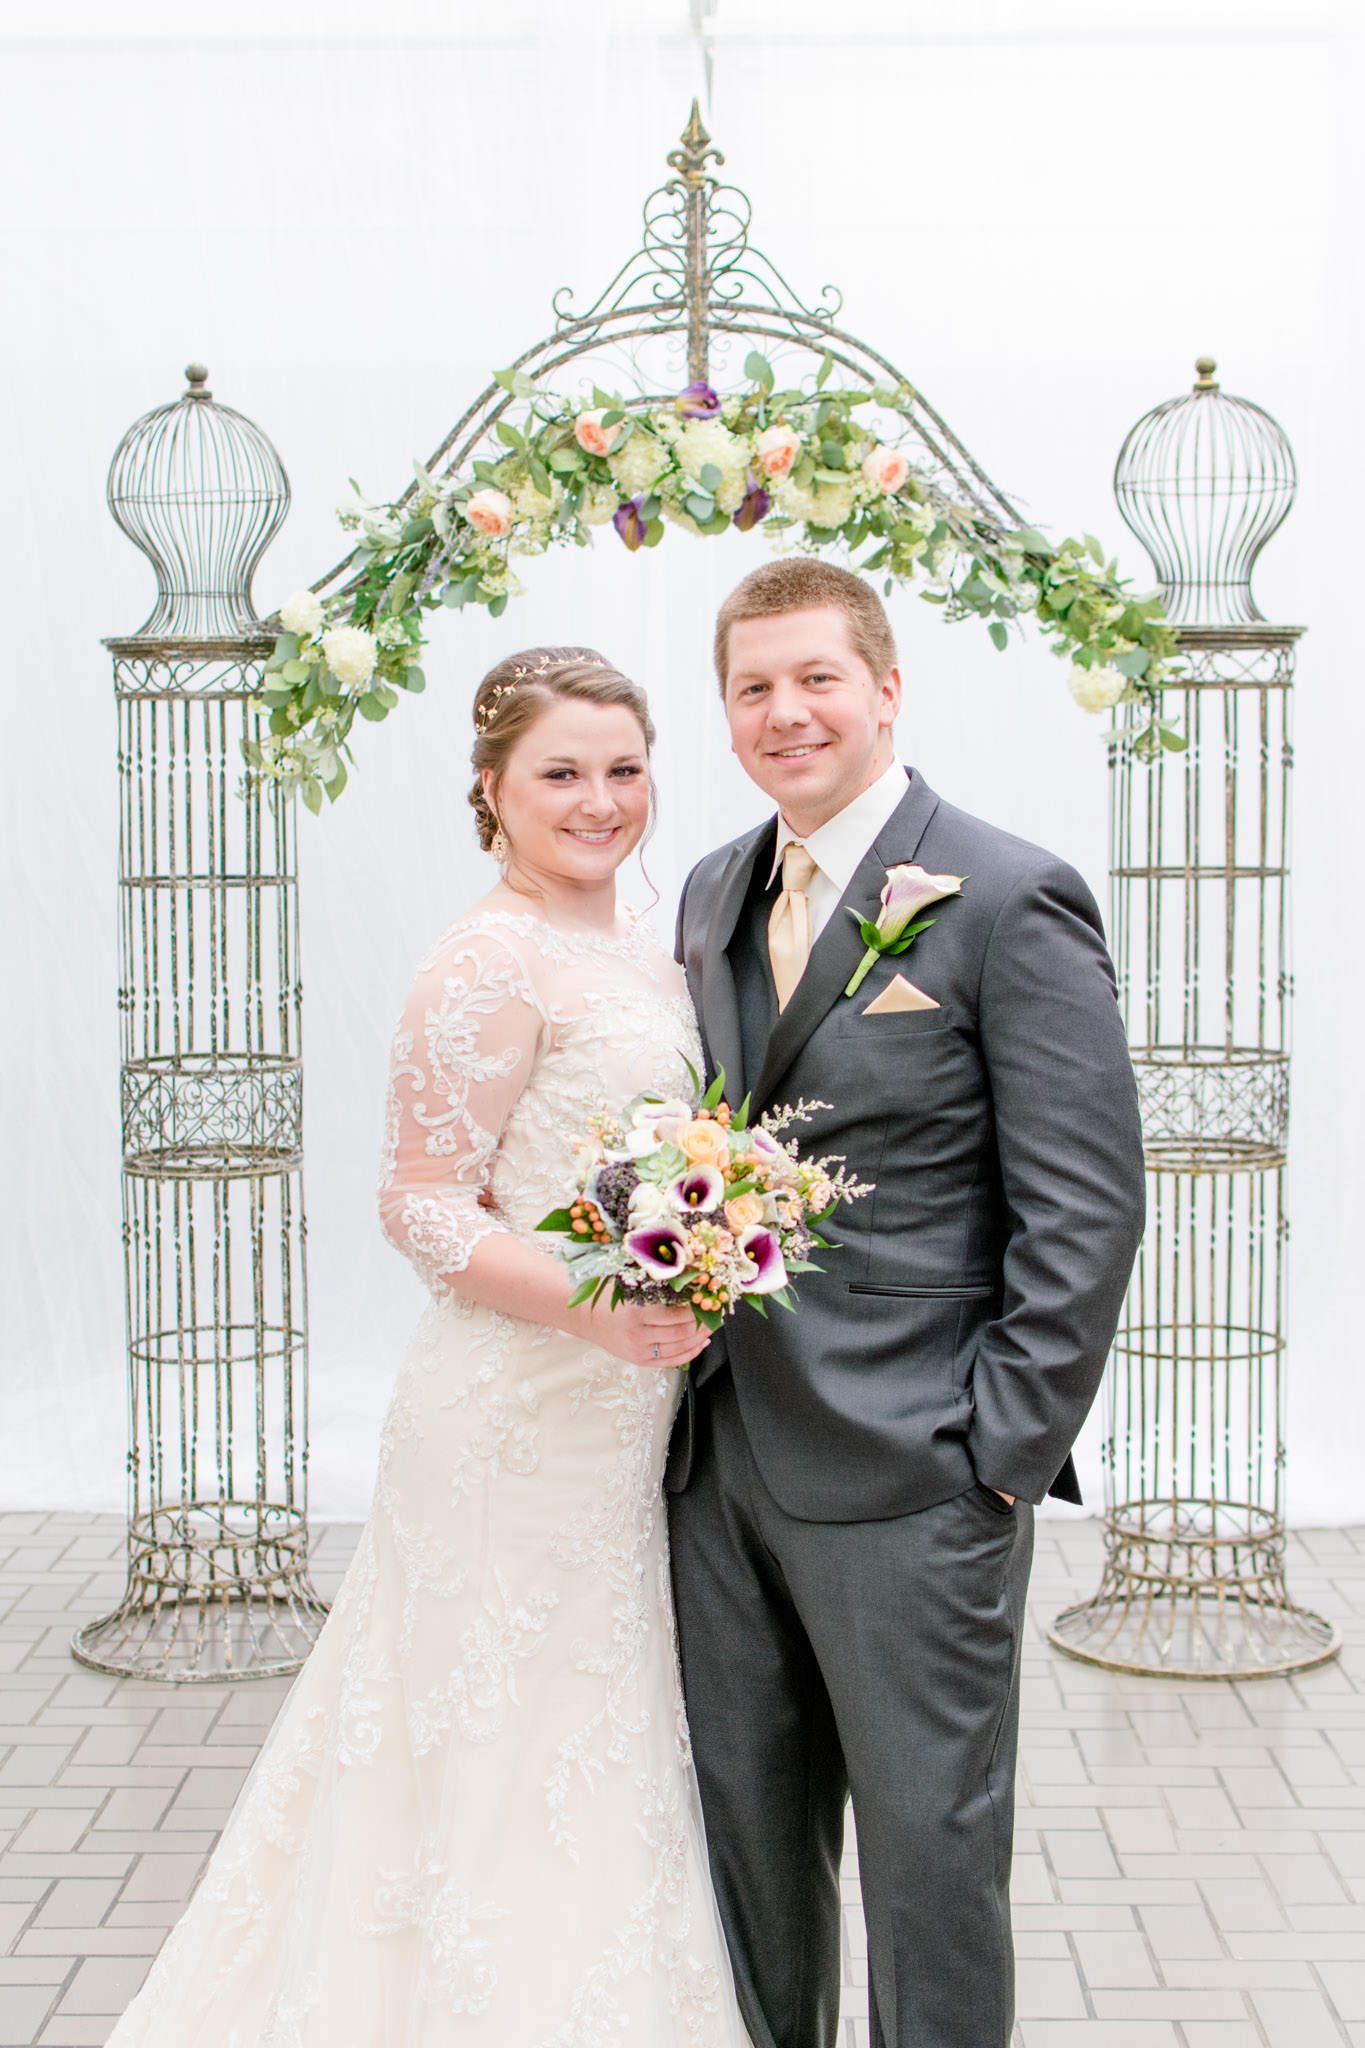 Formal Wedding Portrait of smiling bride and groom in Indianapolis